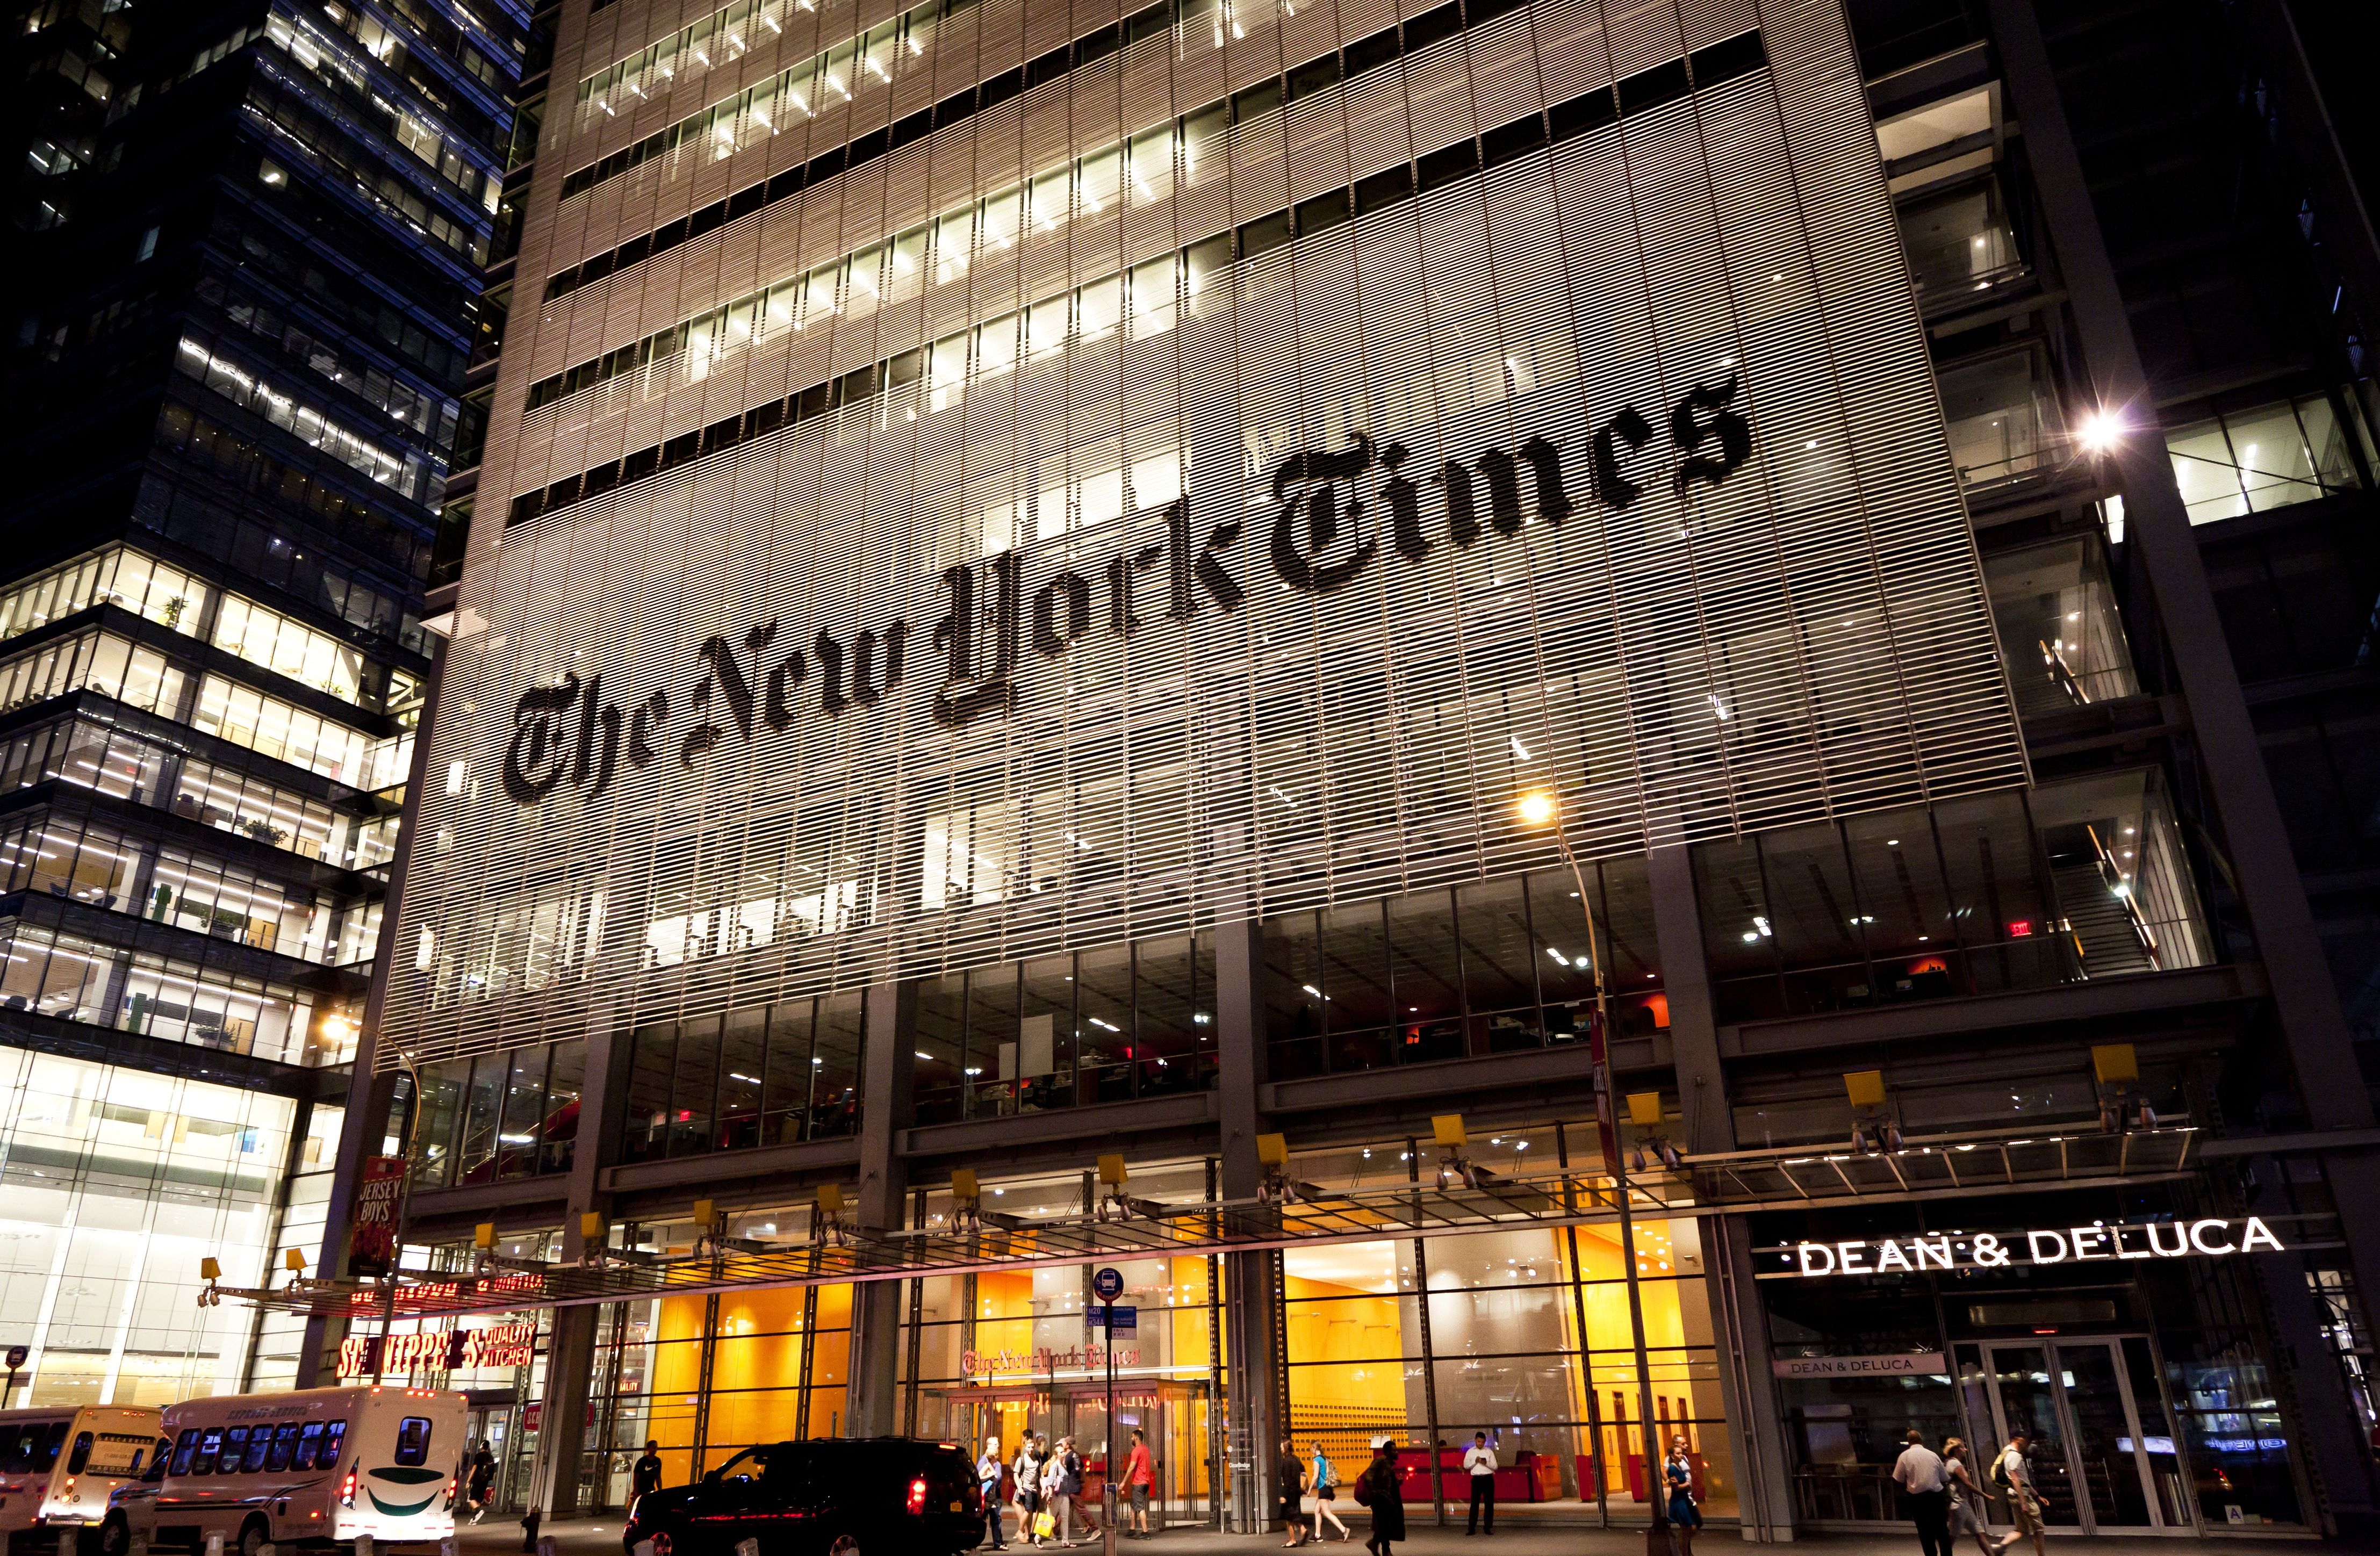 NYT leaps forward in disclosure of potential conflicts